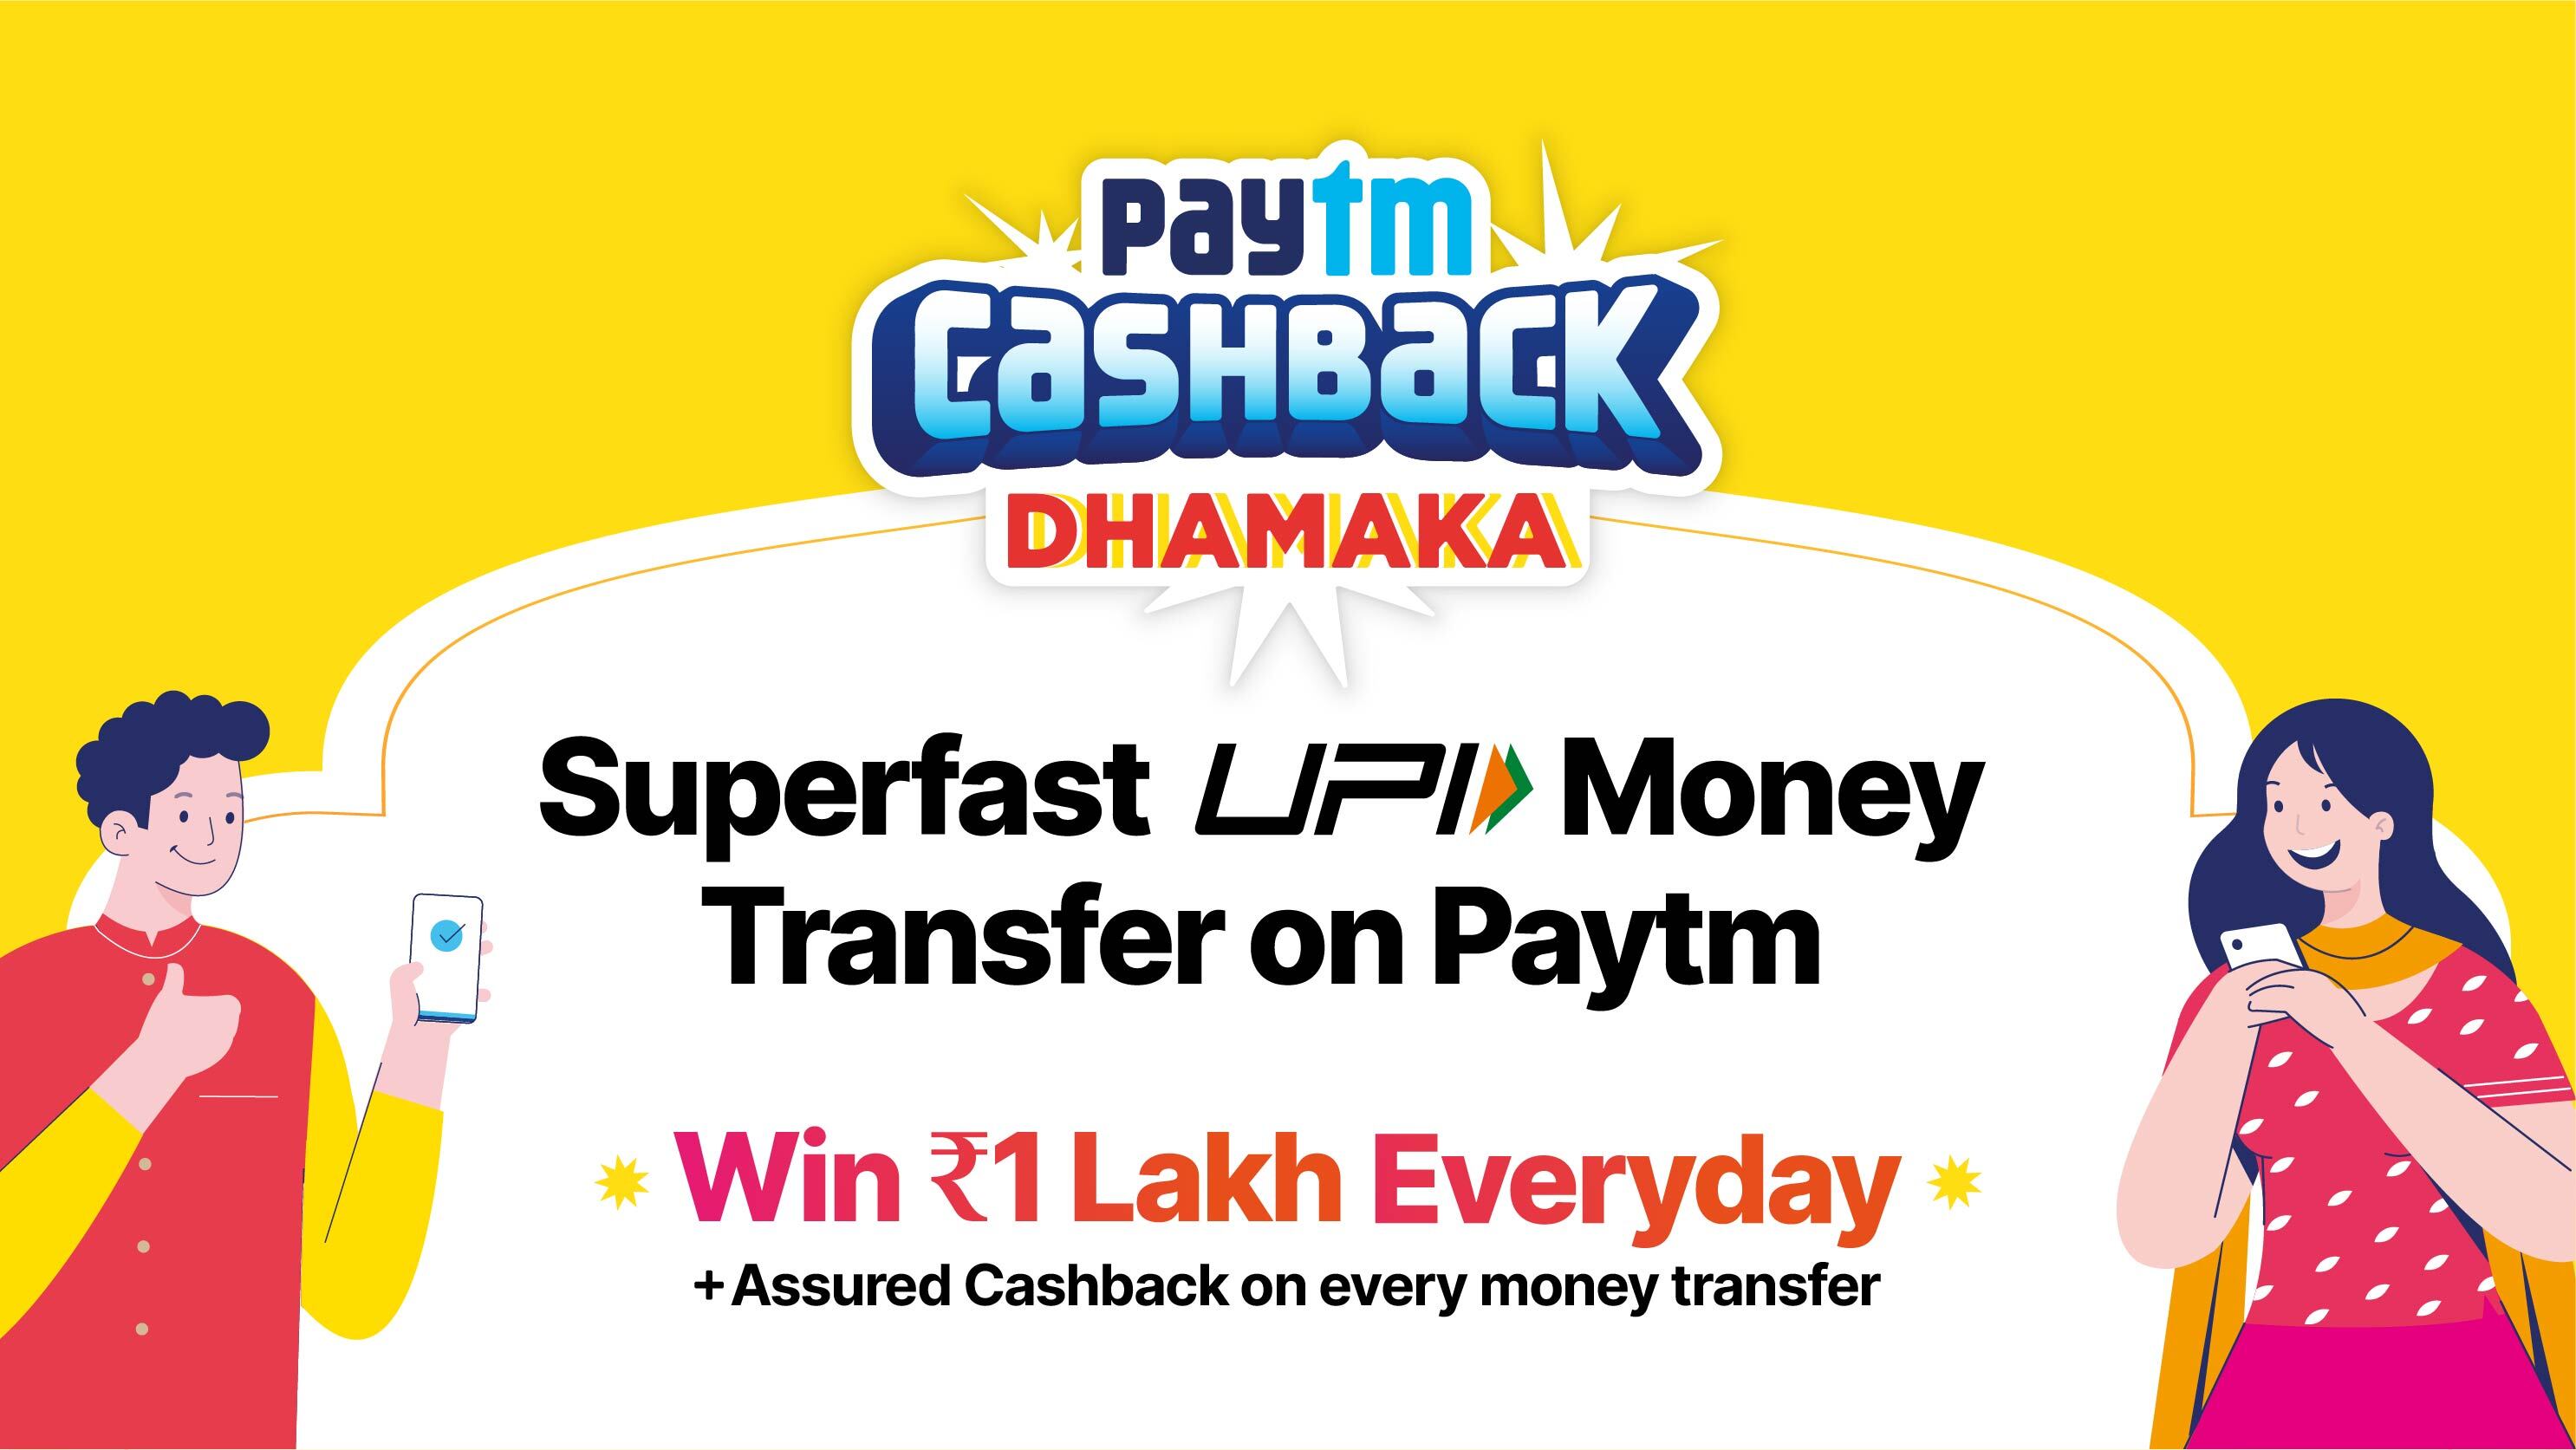 Paytm offer flat 10% cashback on DTH recharges of Tata Sky, Airtel, Dish TV and others decoding=